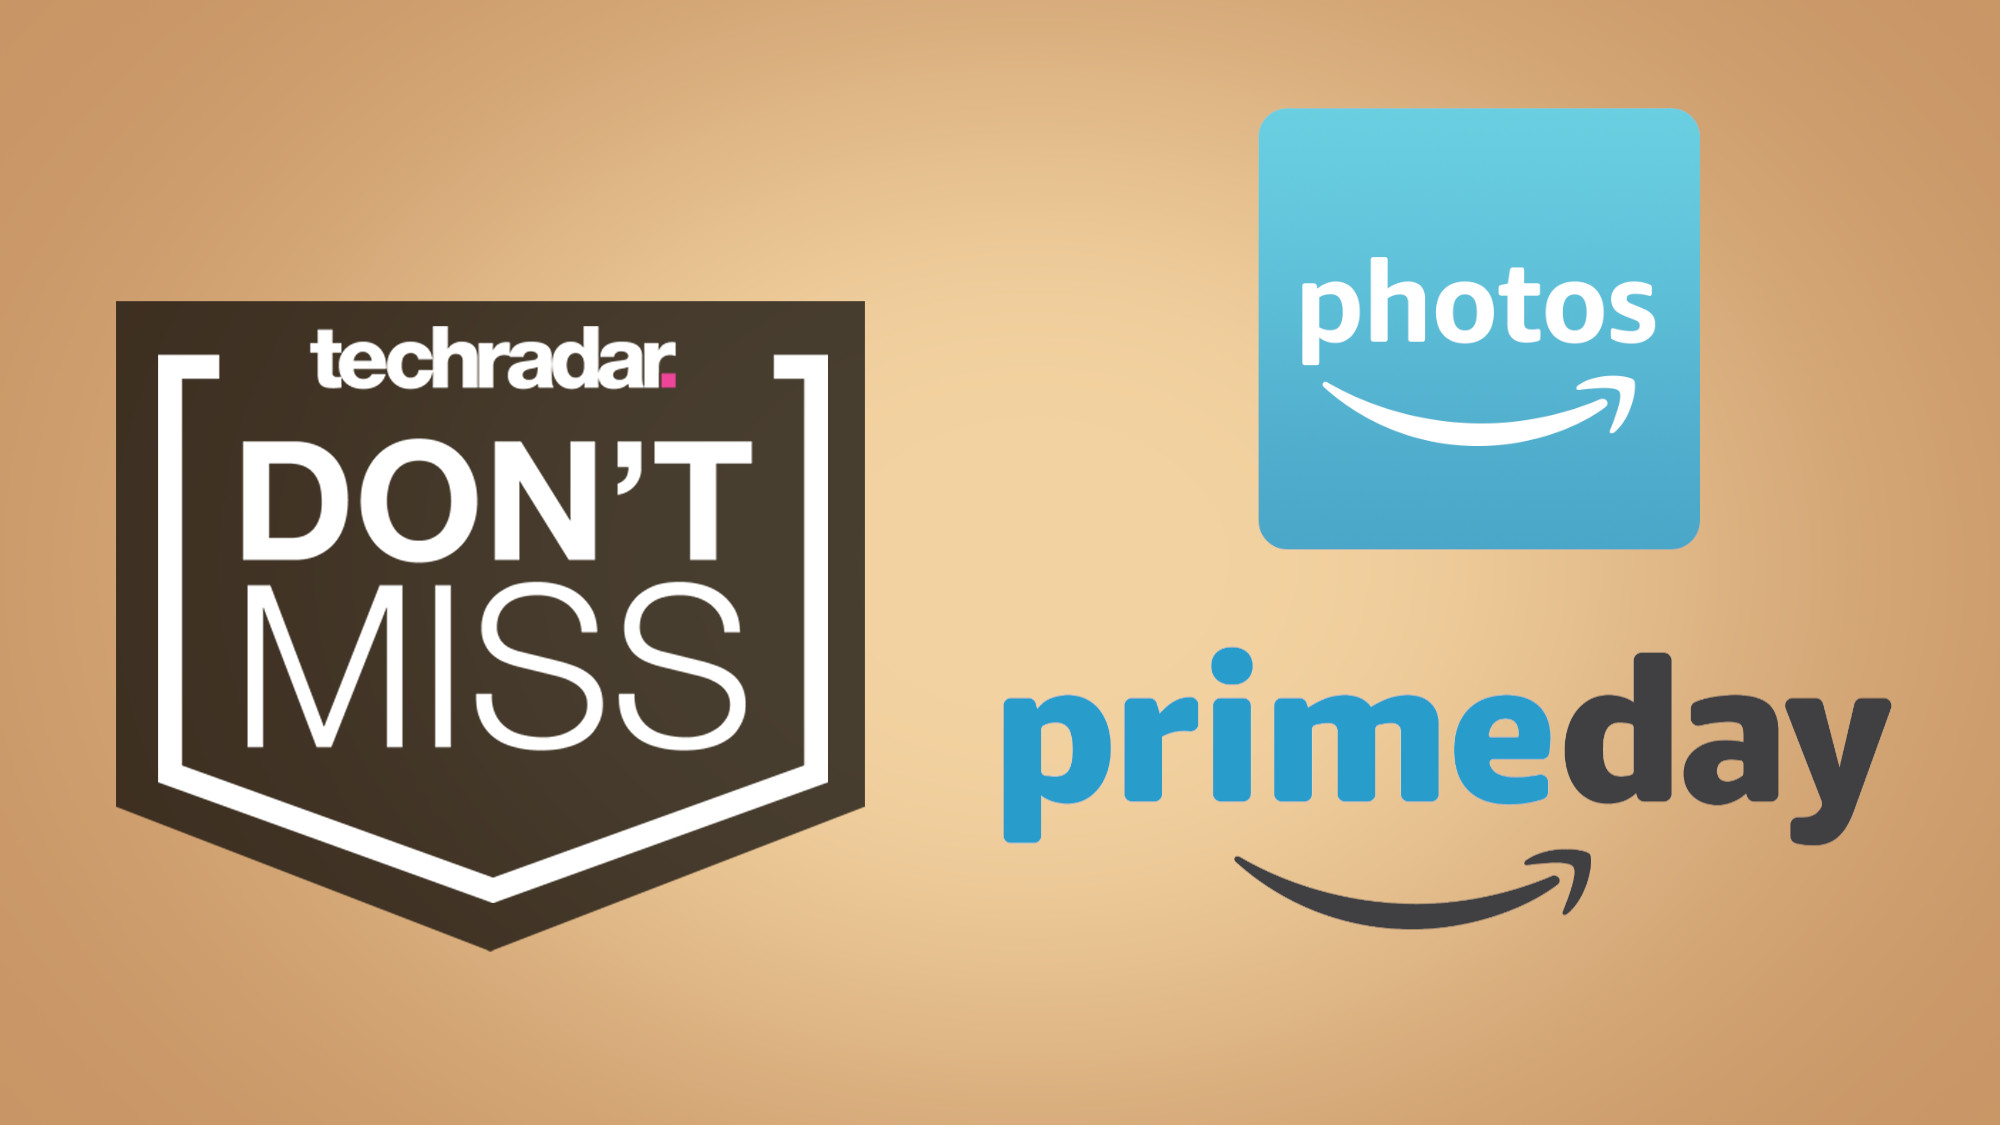 Prime Members Did You Know About This Early Prime Day Perk For Free Photo Prints Techradar